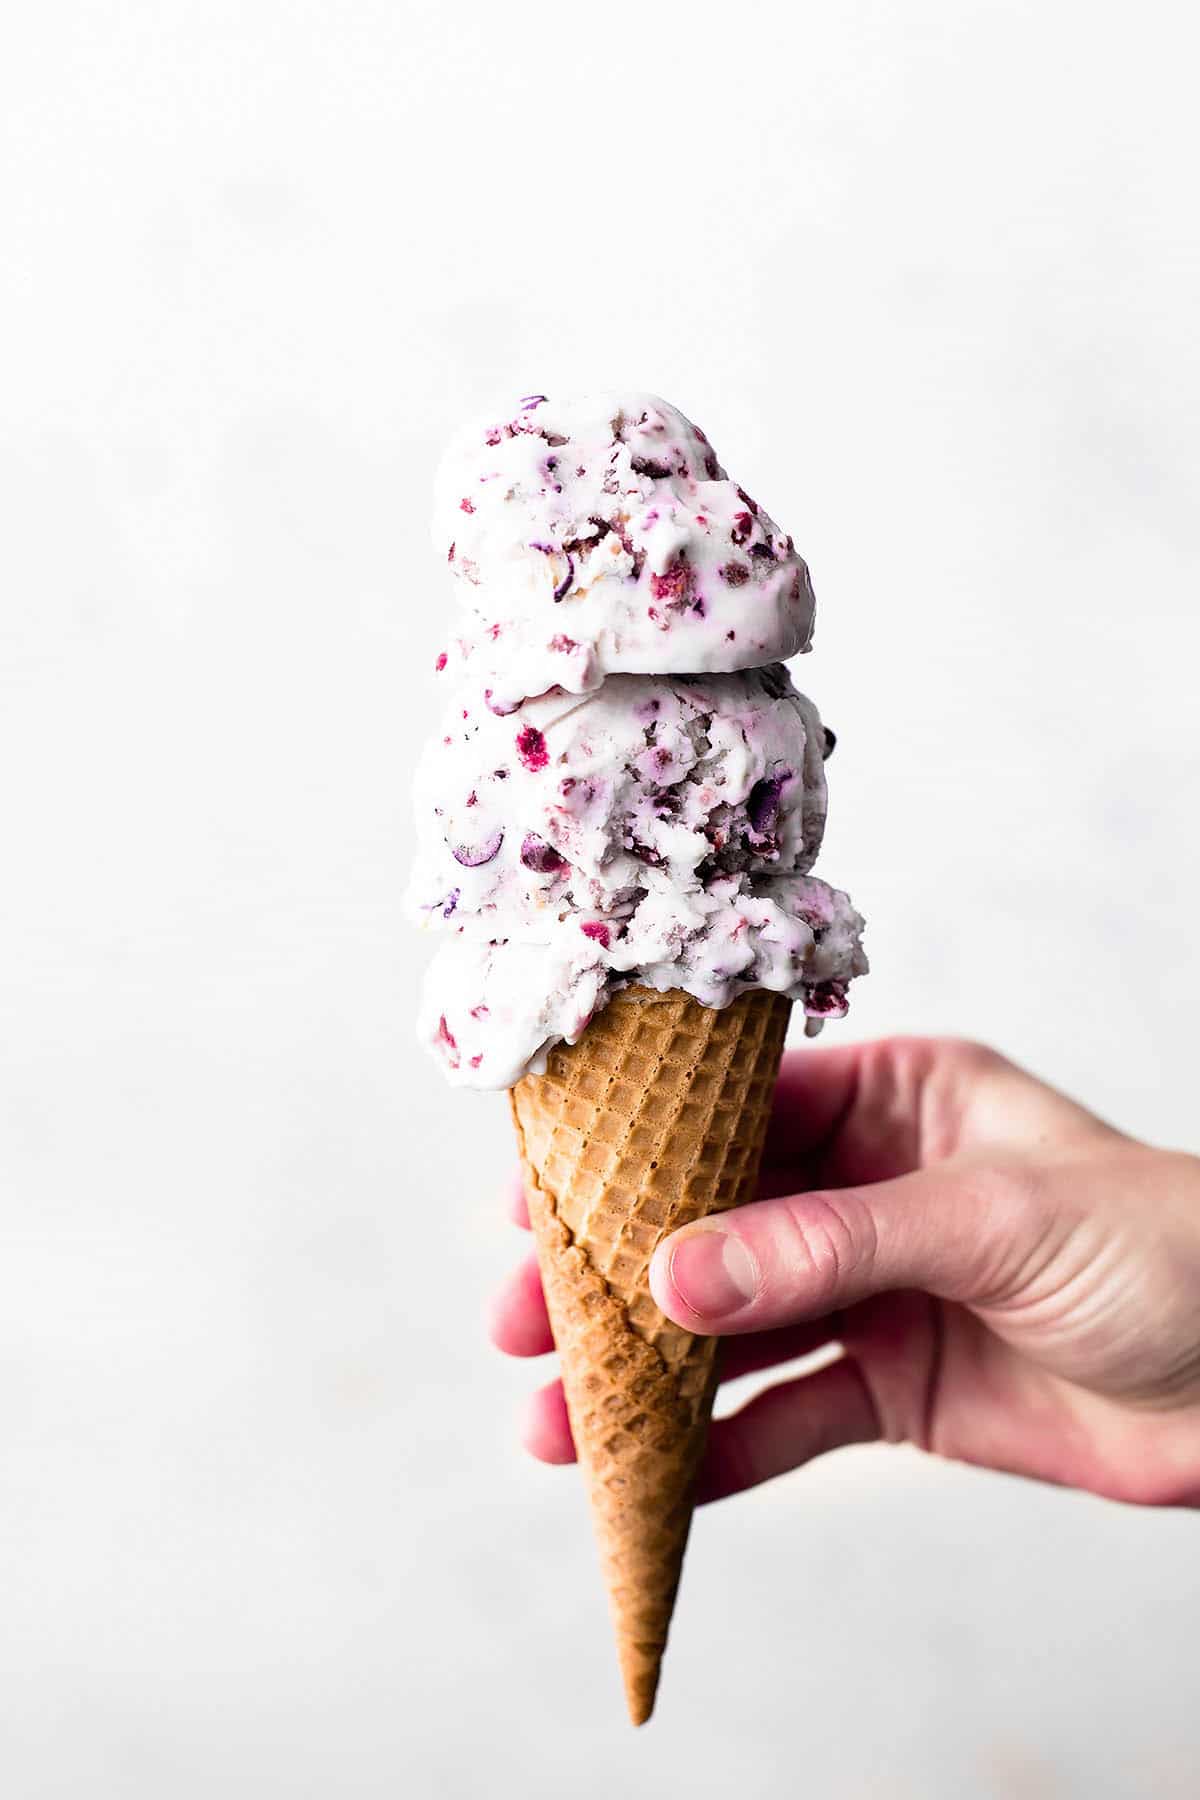 a hand holding an ice cream cone with two scoops of mixed berry ice cream.